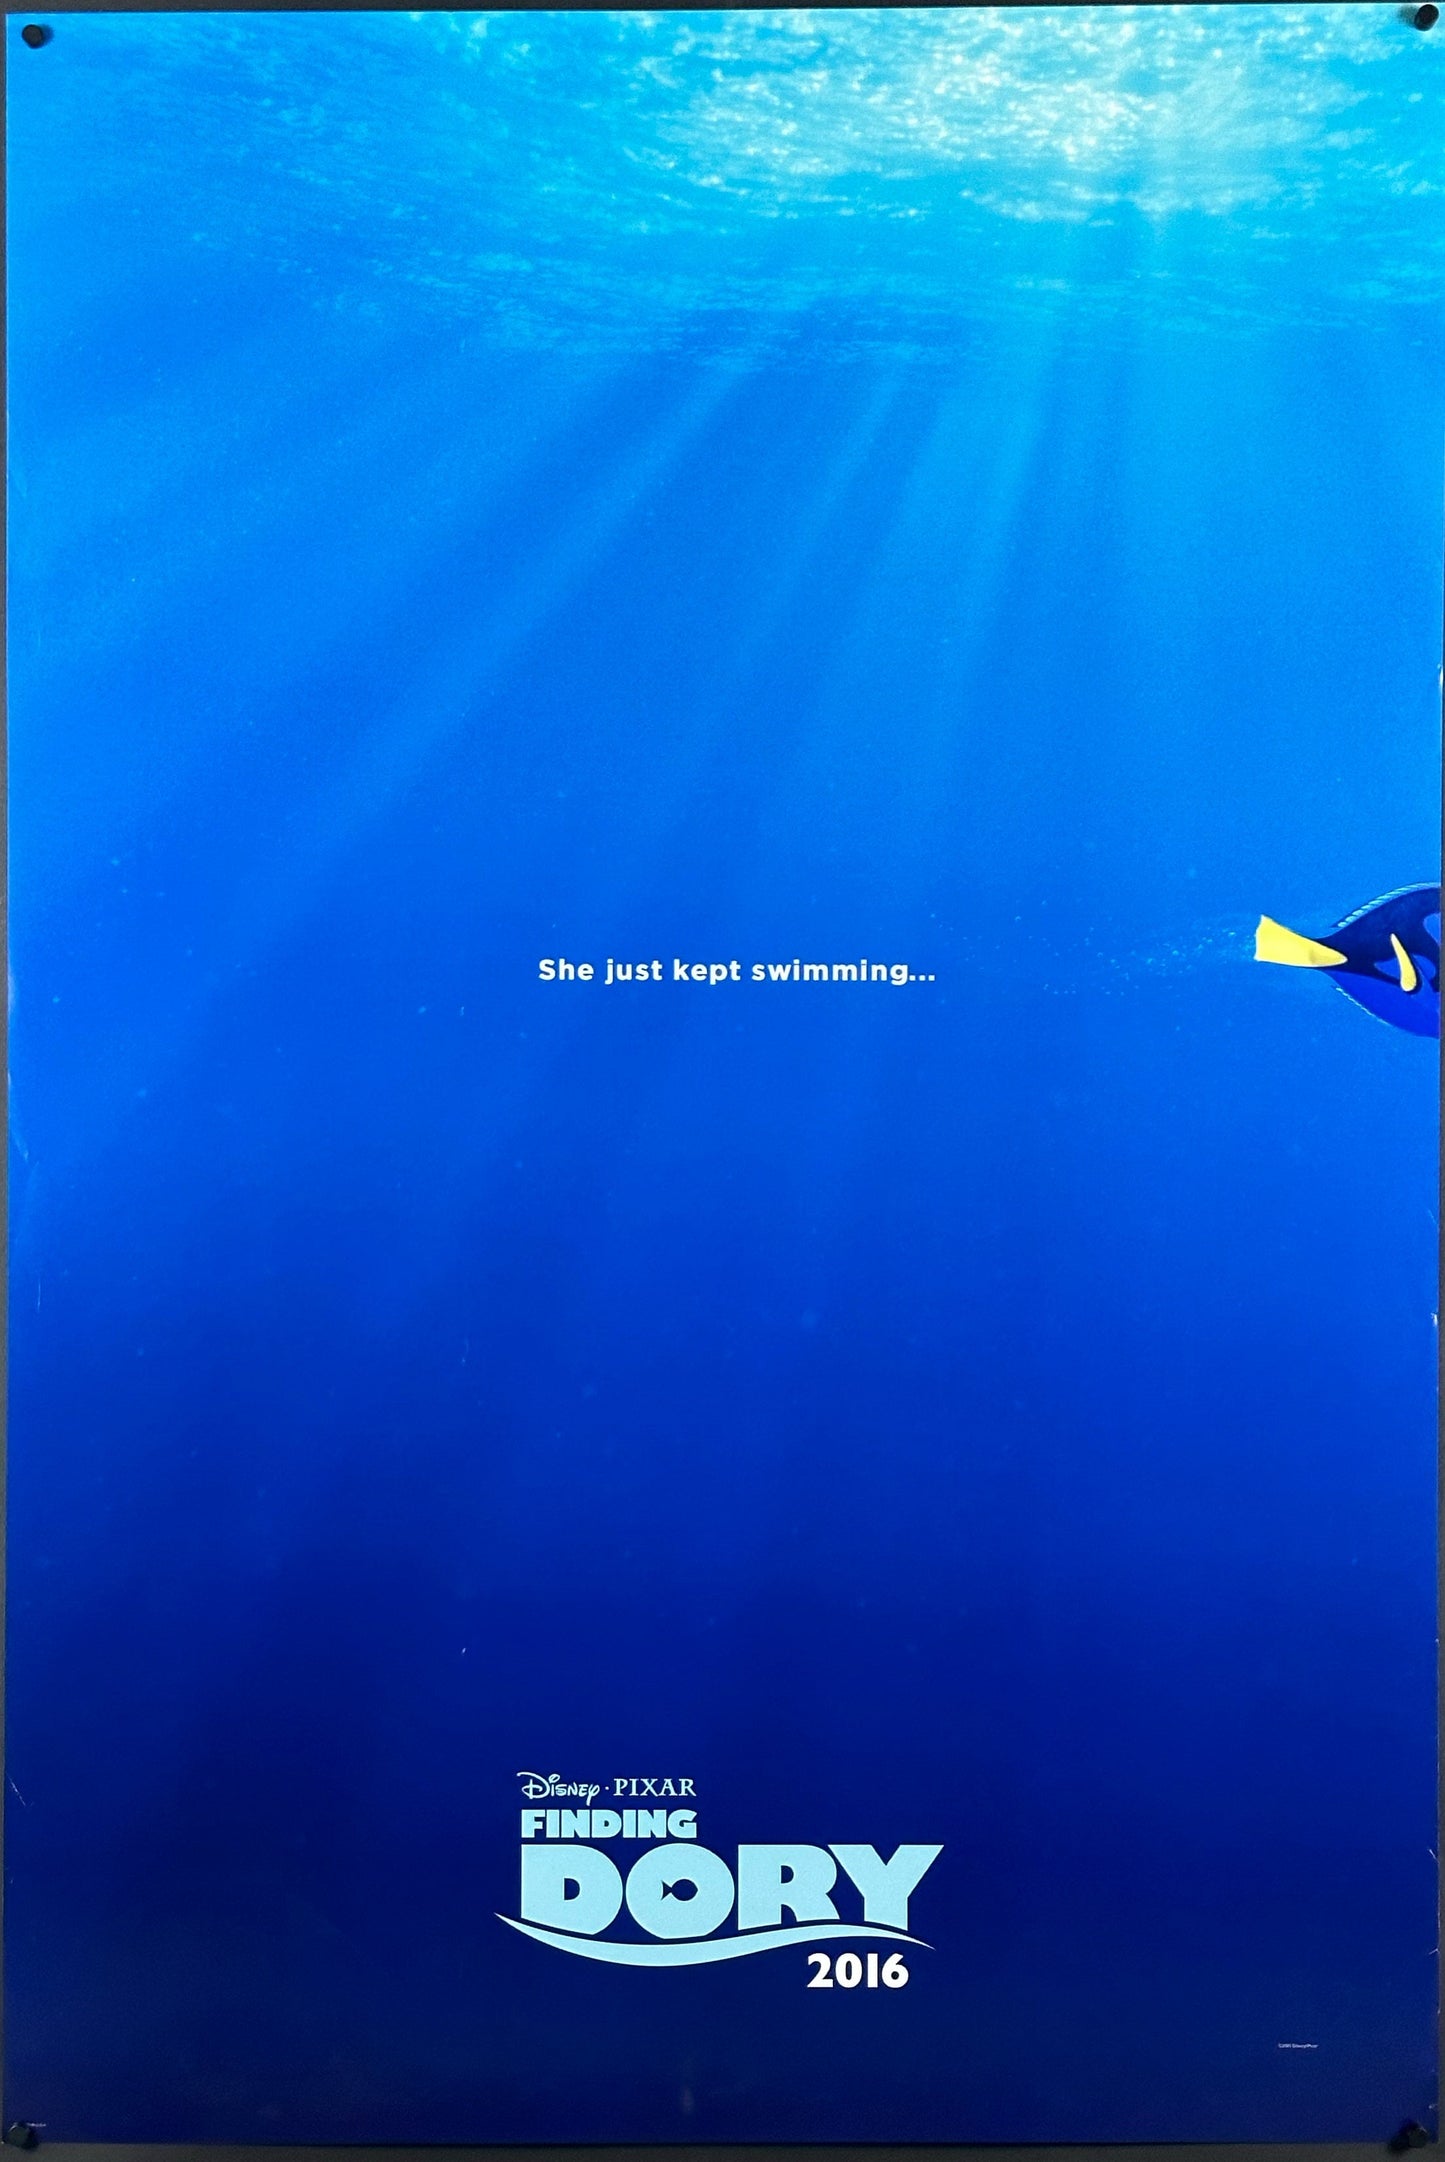 Finding Dory US One Sheet Teaser Style (2016) - ORIGINAL RELEASE - posterpalace.com